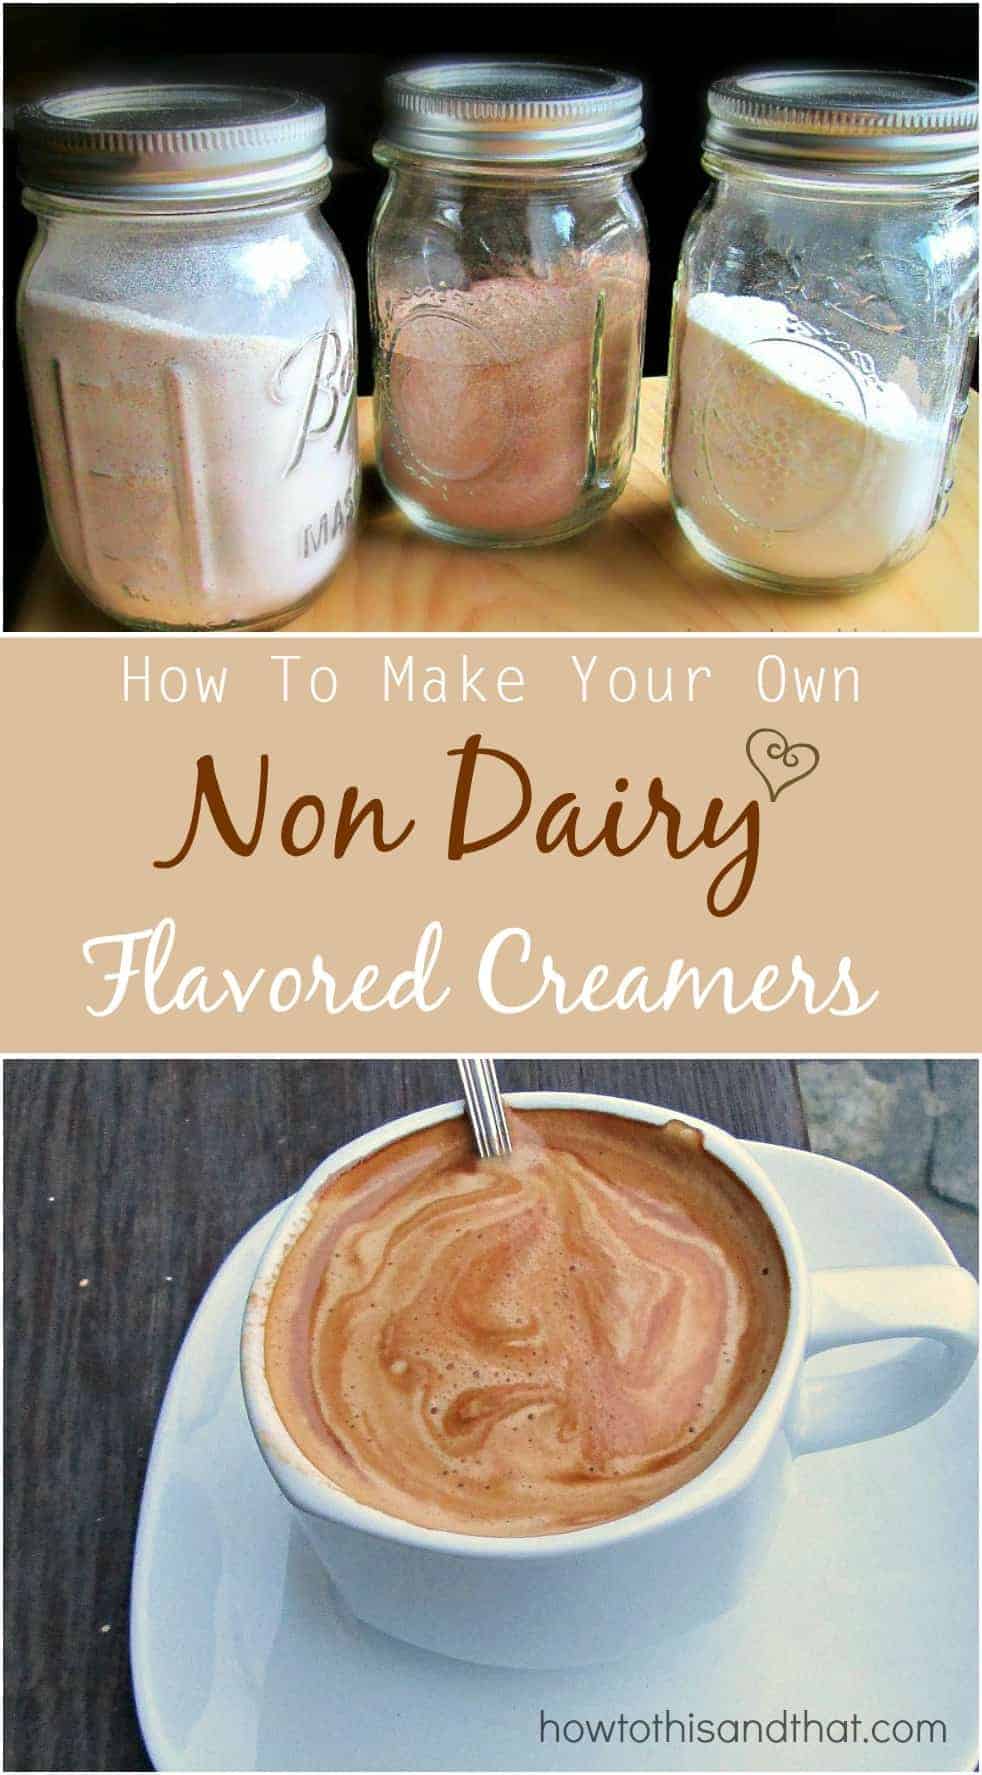 How To Make Your Own Non Dairy Flavored Coffee Creamers